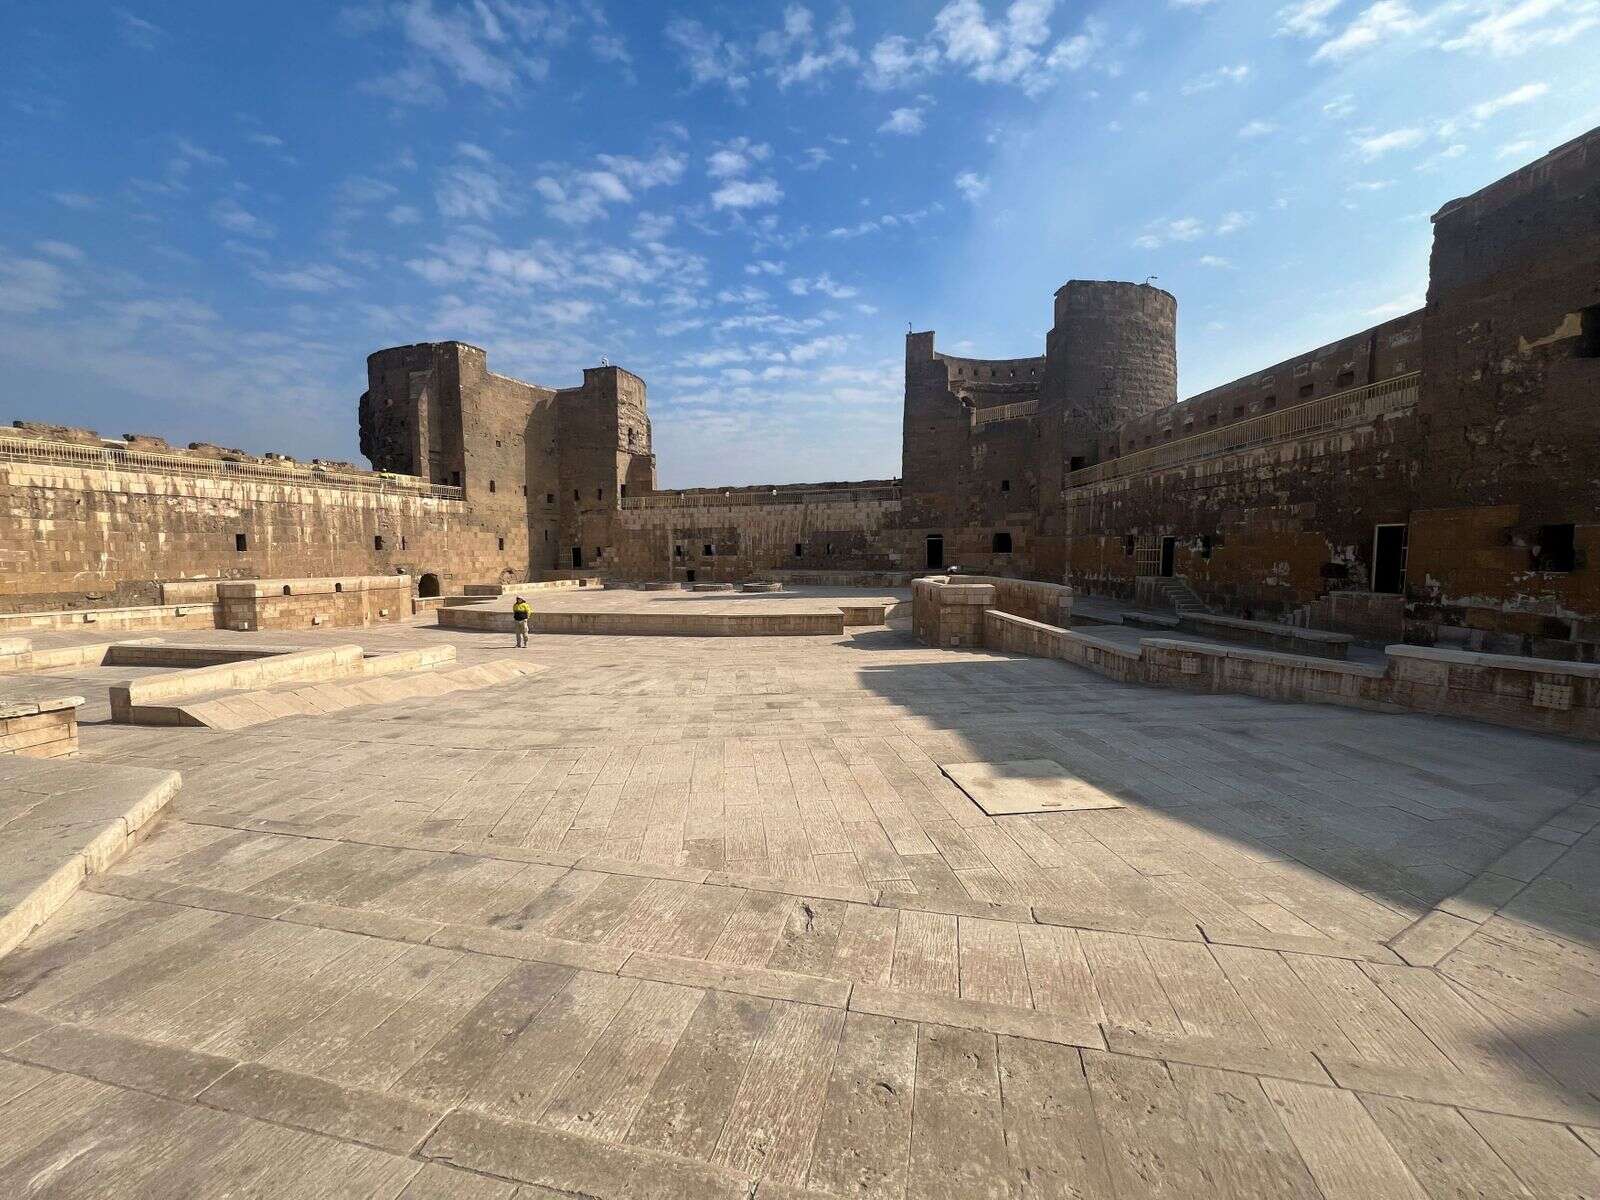 cairo citadel opens another wing to public to attract more visitors